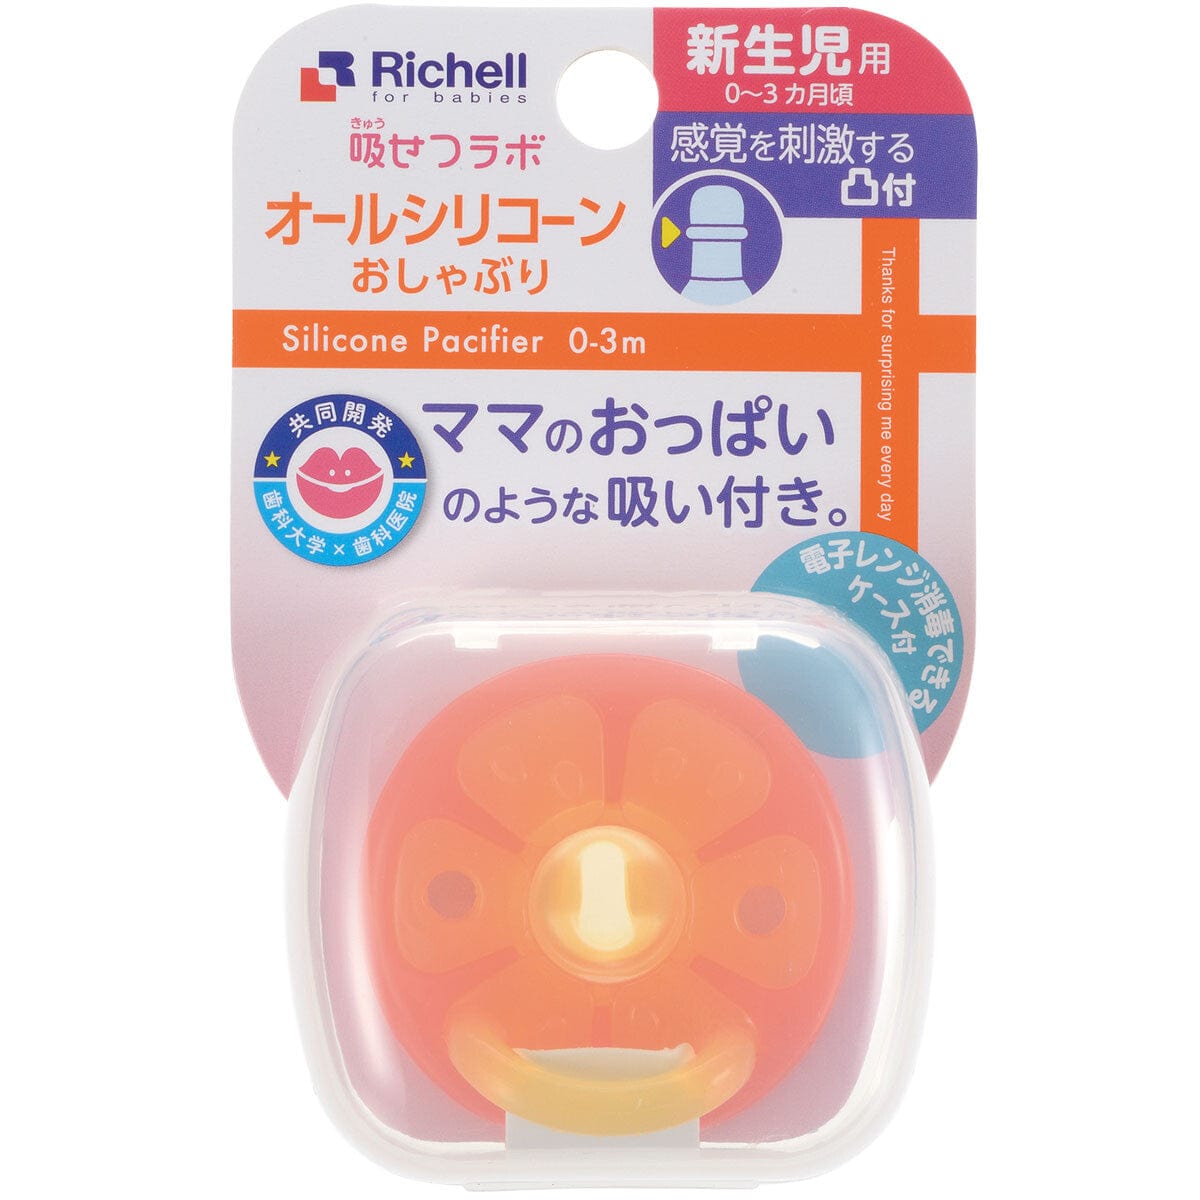 Richell - New Born Baby Silicone Pacifier with Storage Case CherryAffairs